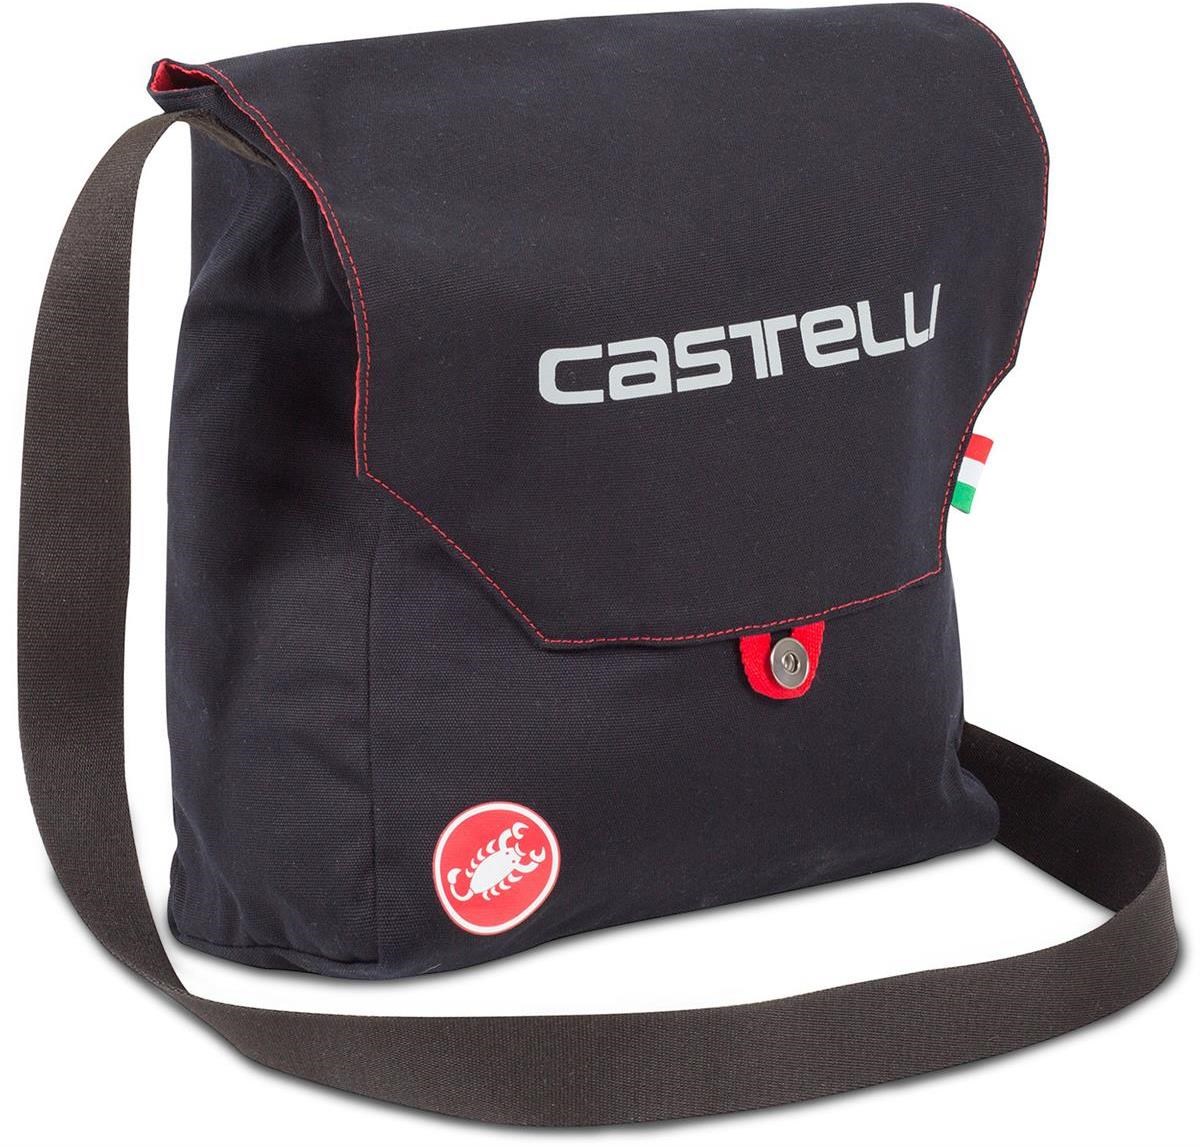 Castelli Deluxe Musette product image